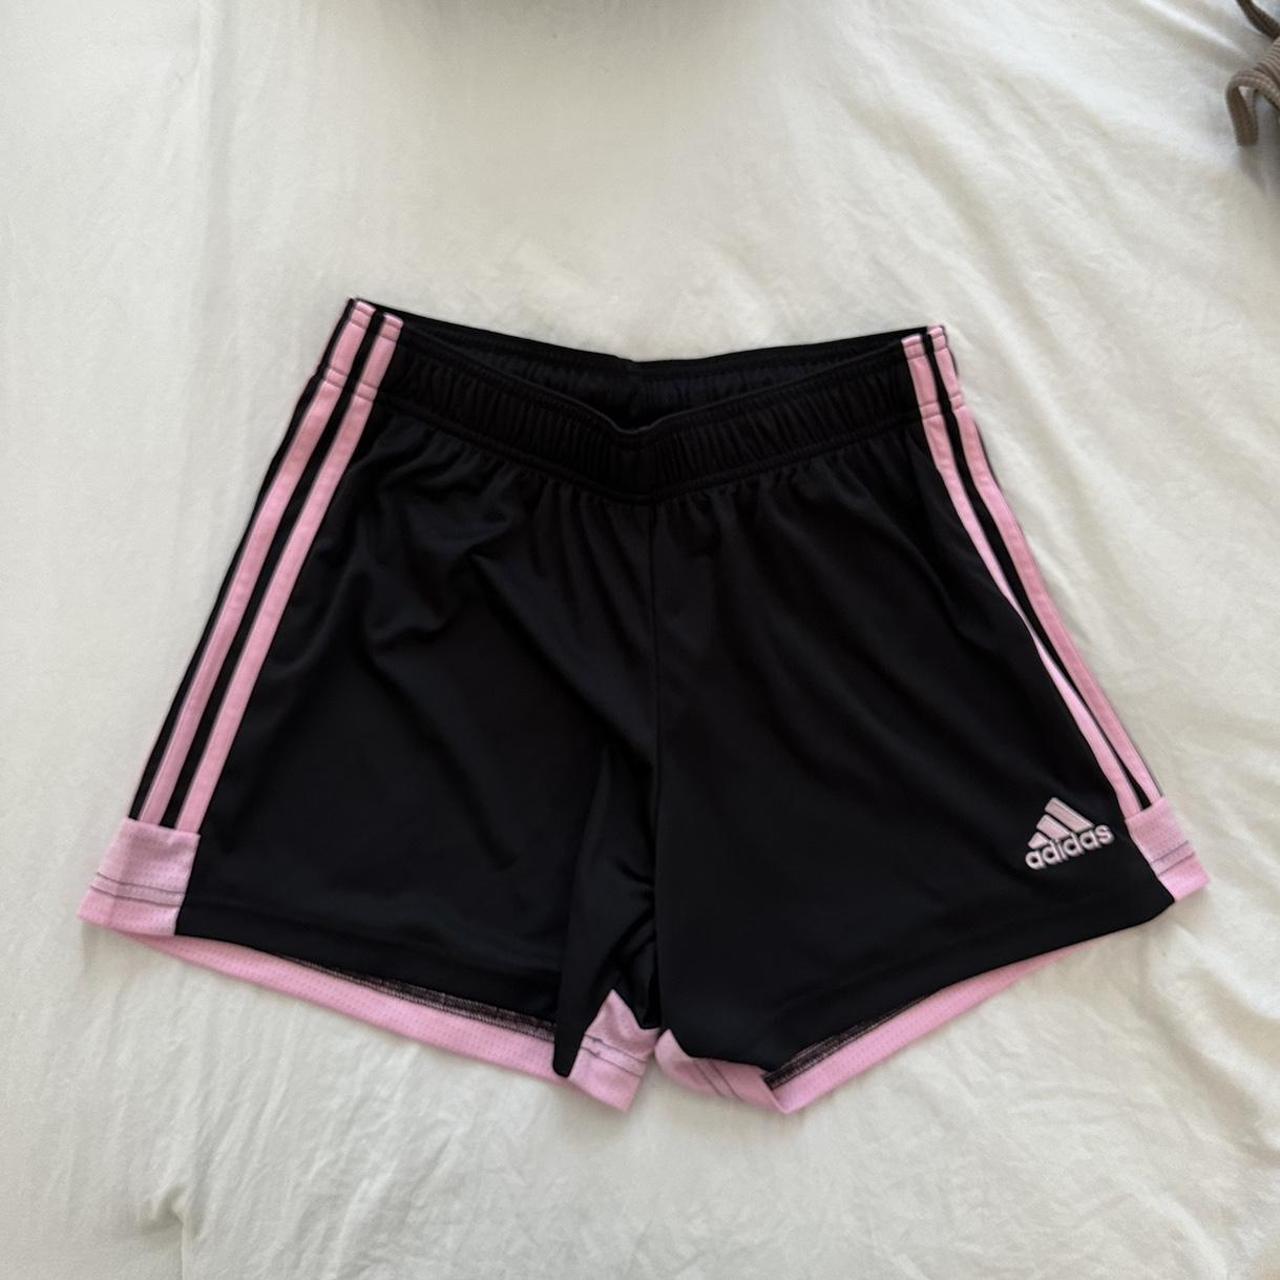 Adidas Women's Pink and Black Shorts